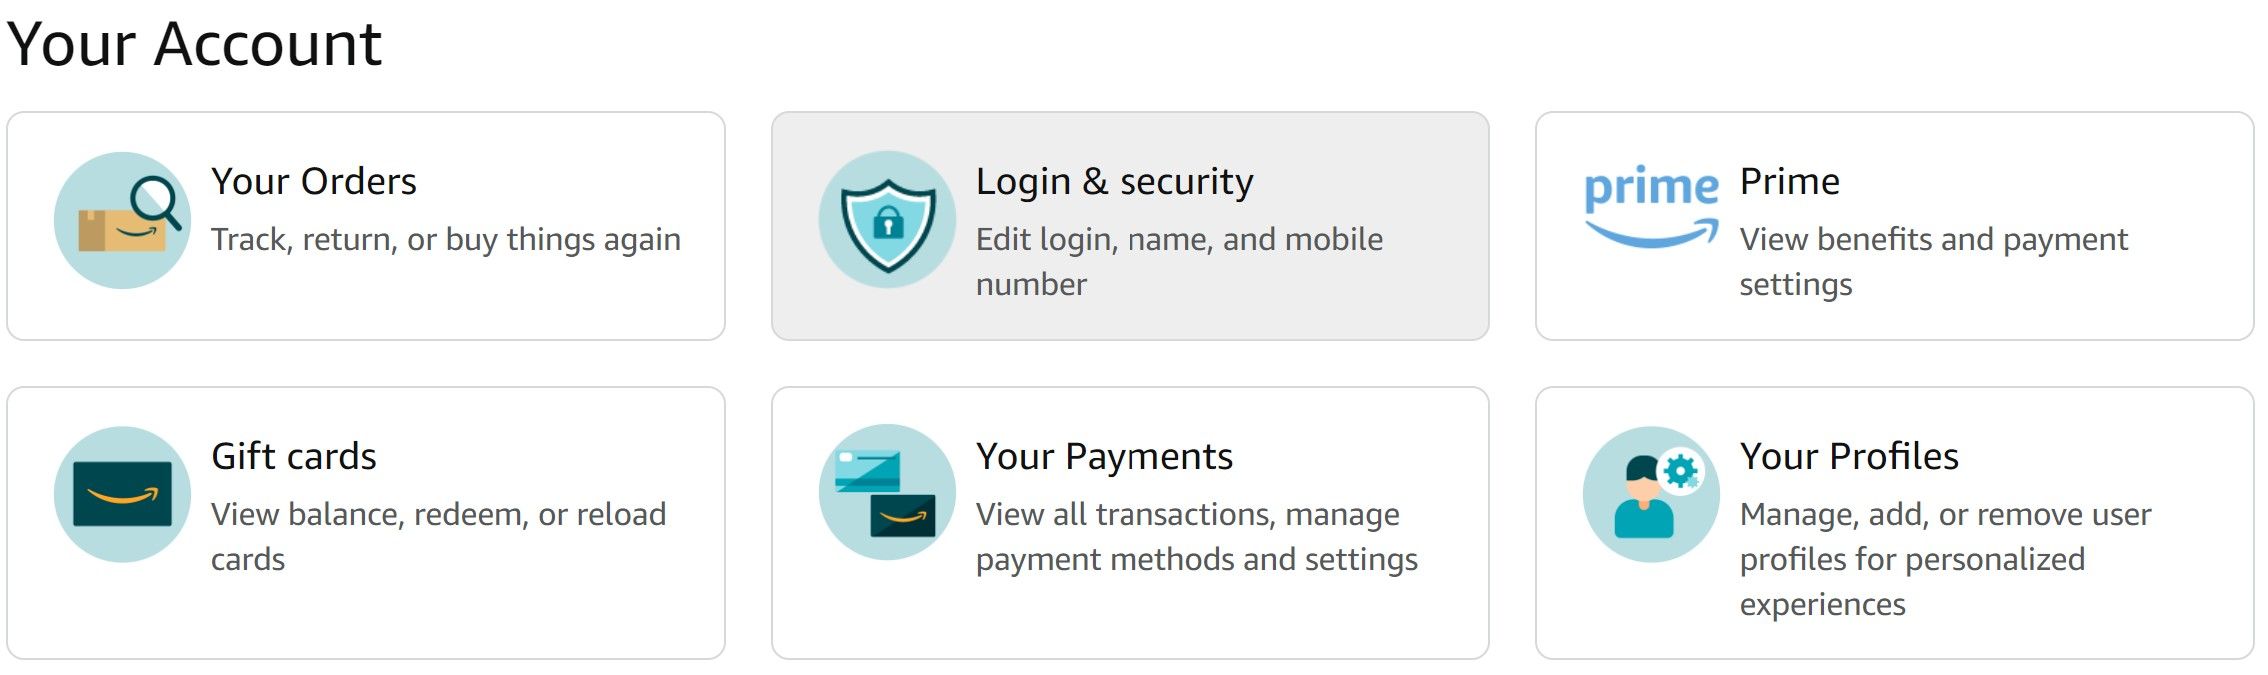 Amazon shopping desktop website login and security button highlighted